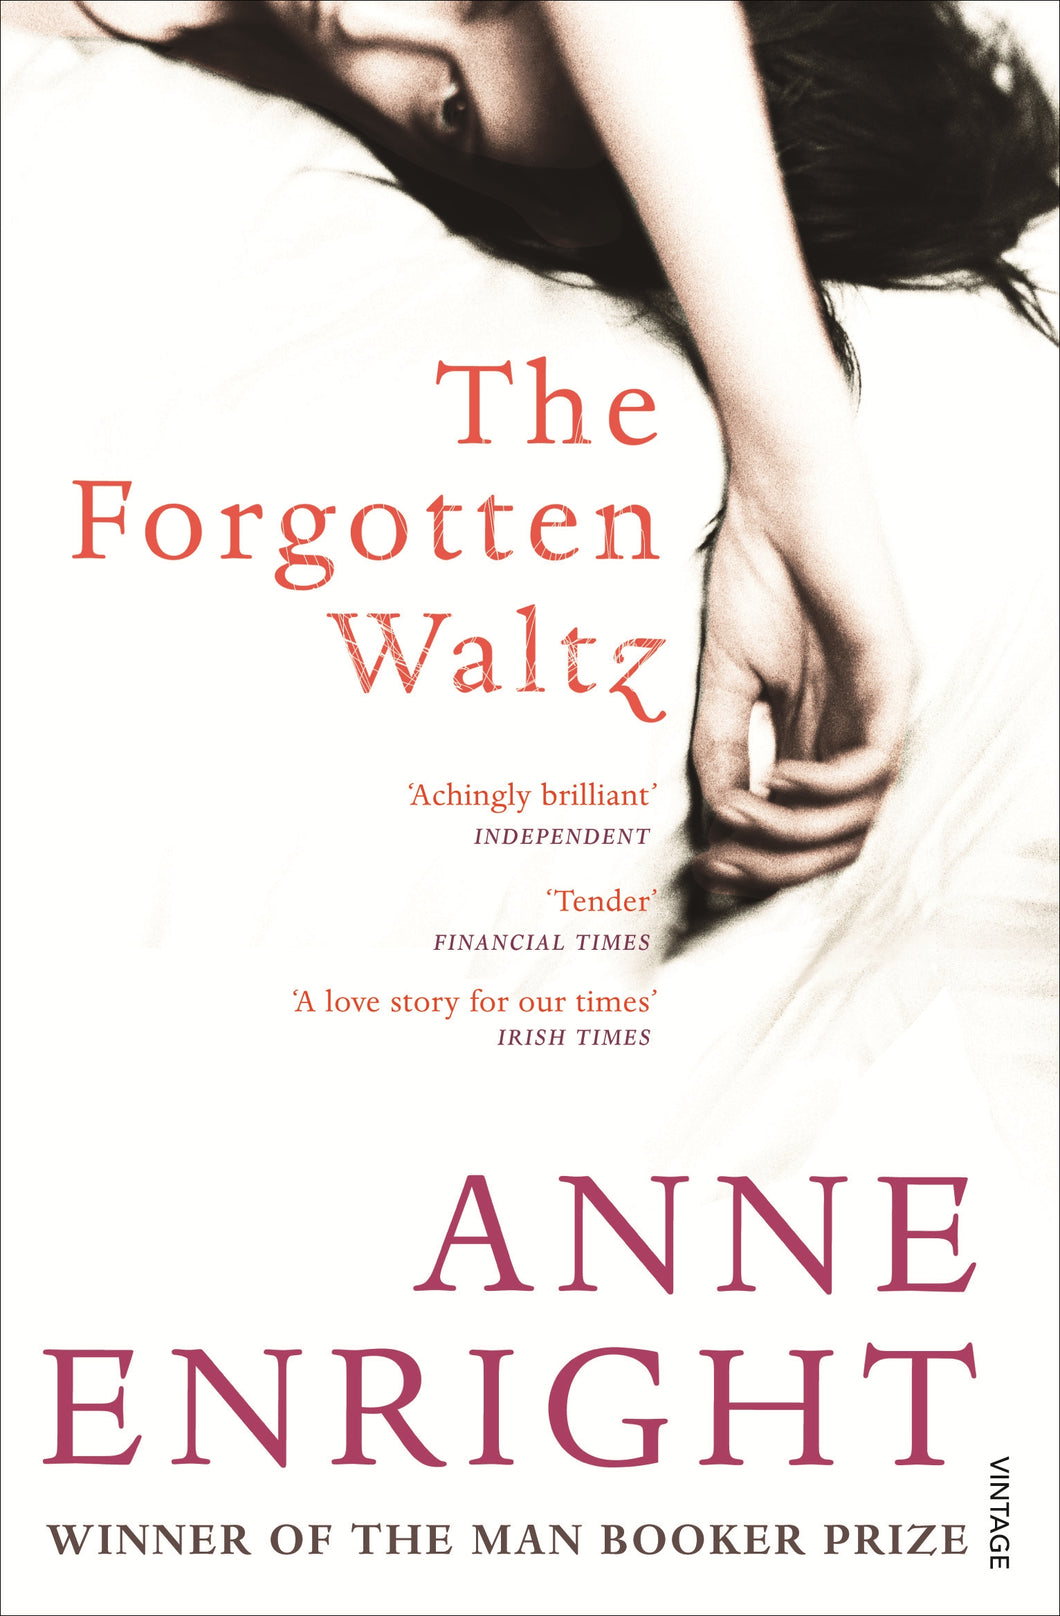 The Forgotten Waltz by Anne Enright: stock image of front cover.